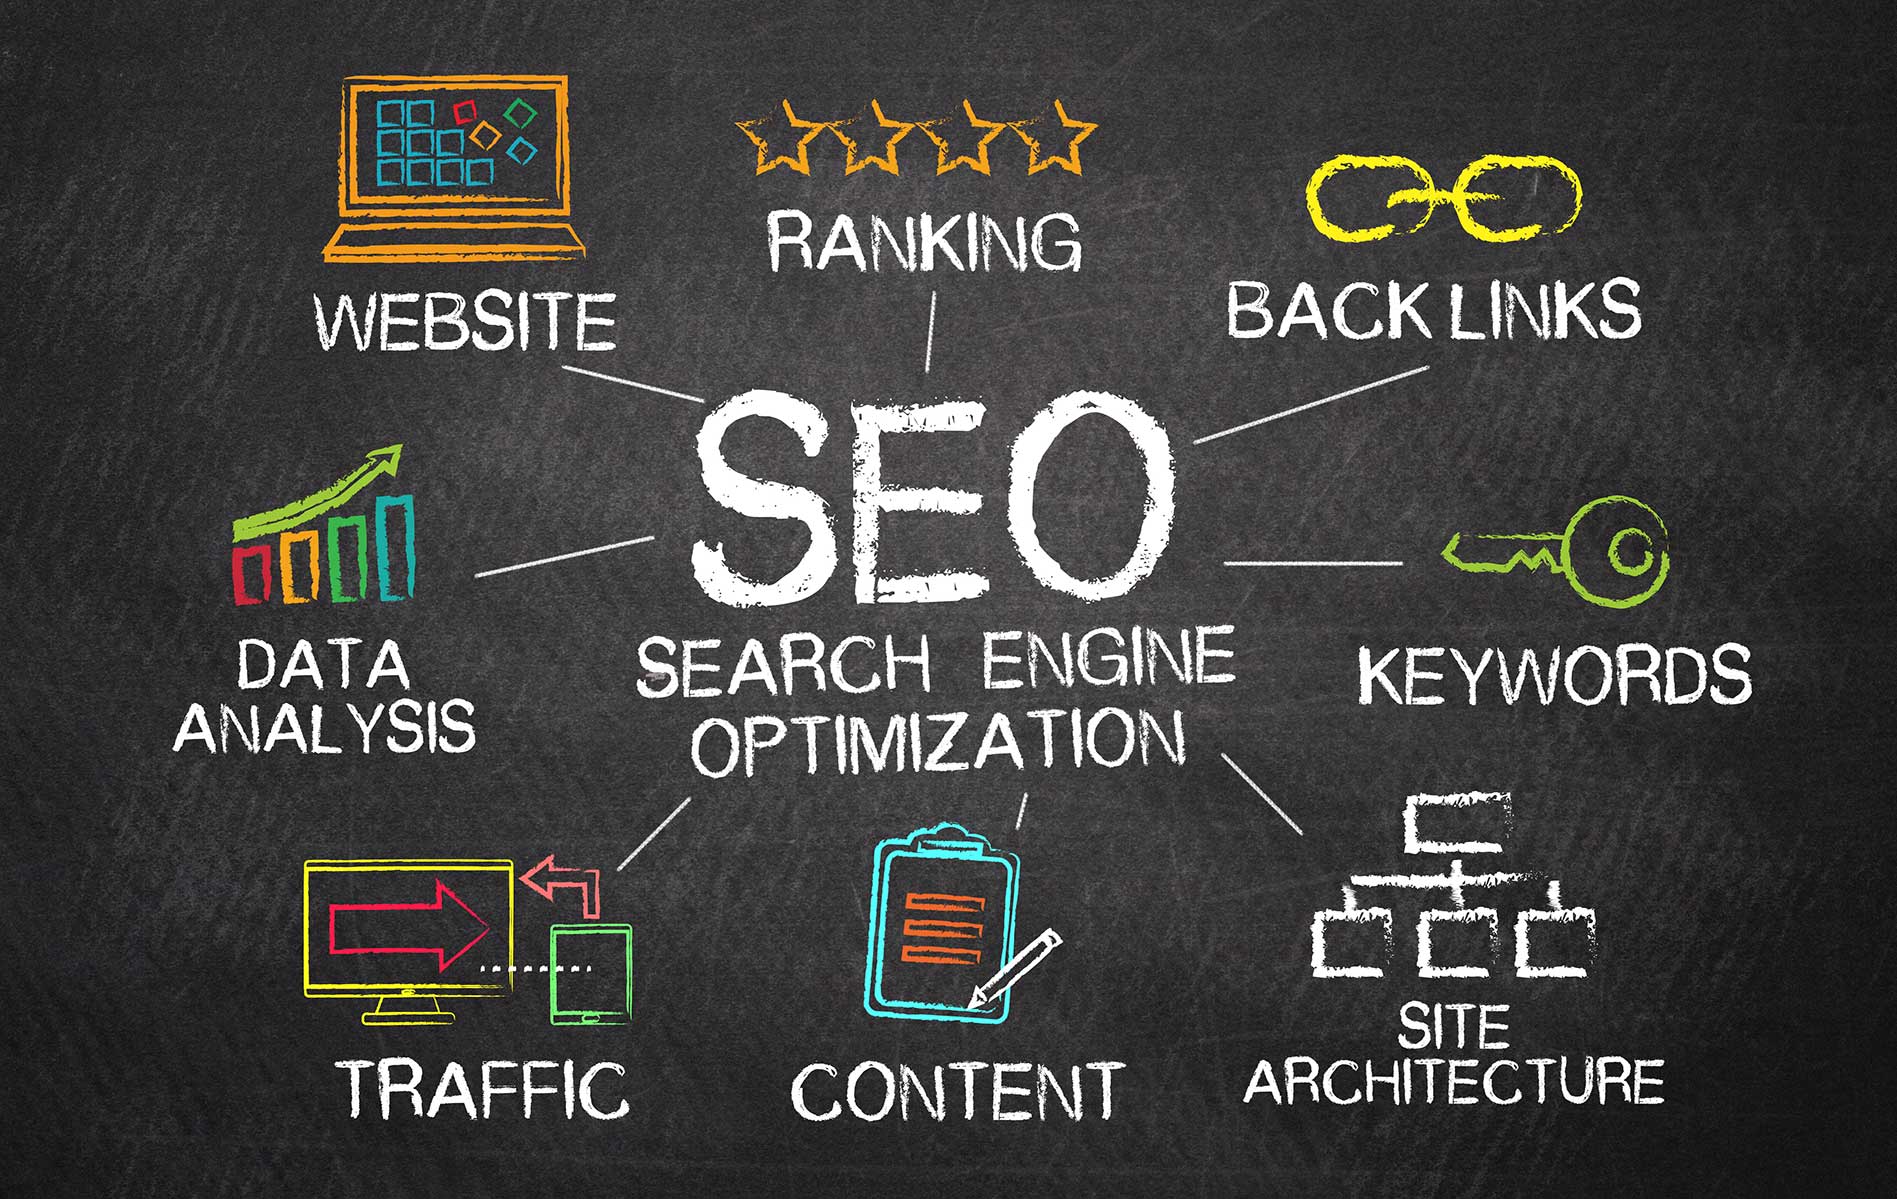 Why SEO is More Than Just a Ranking?